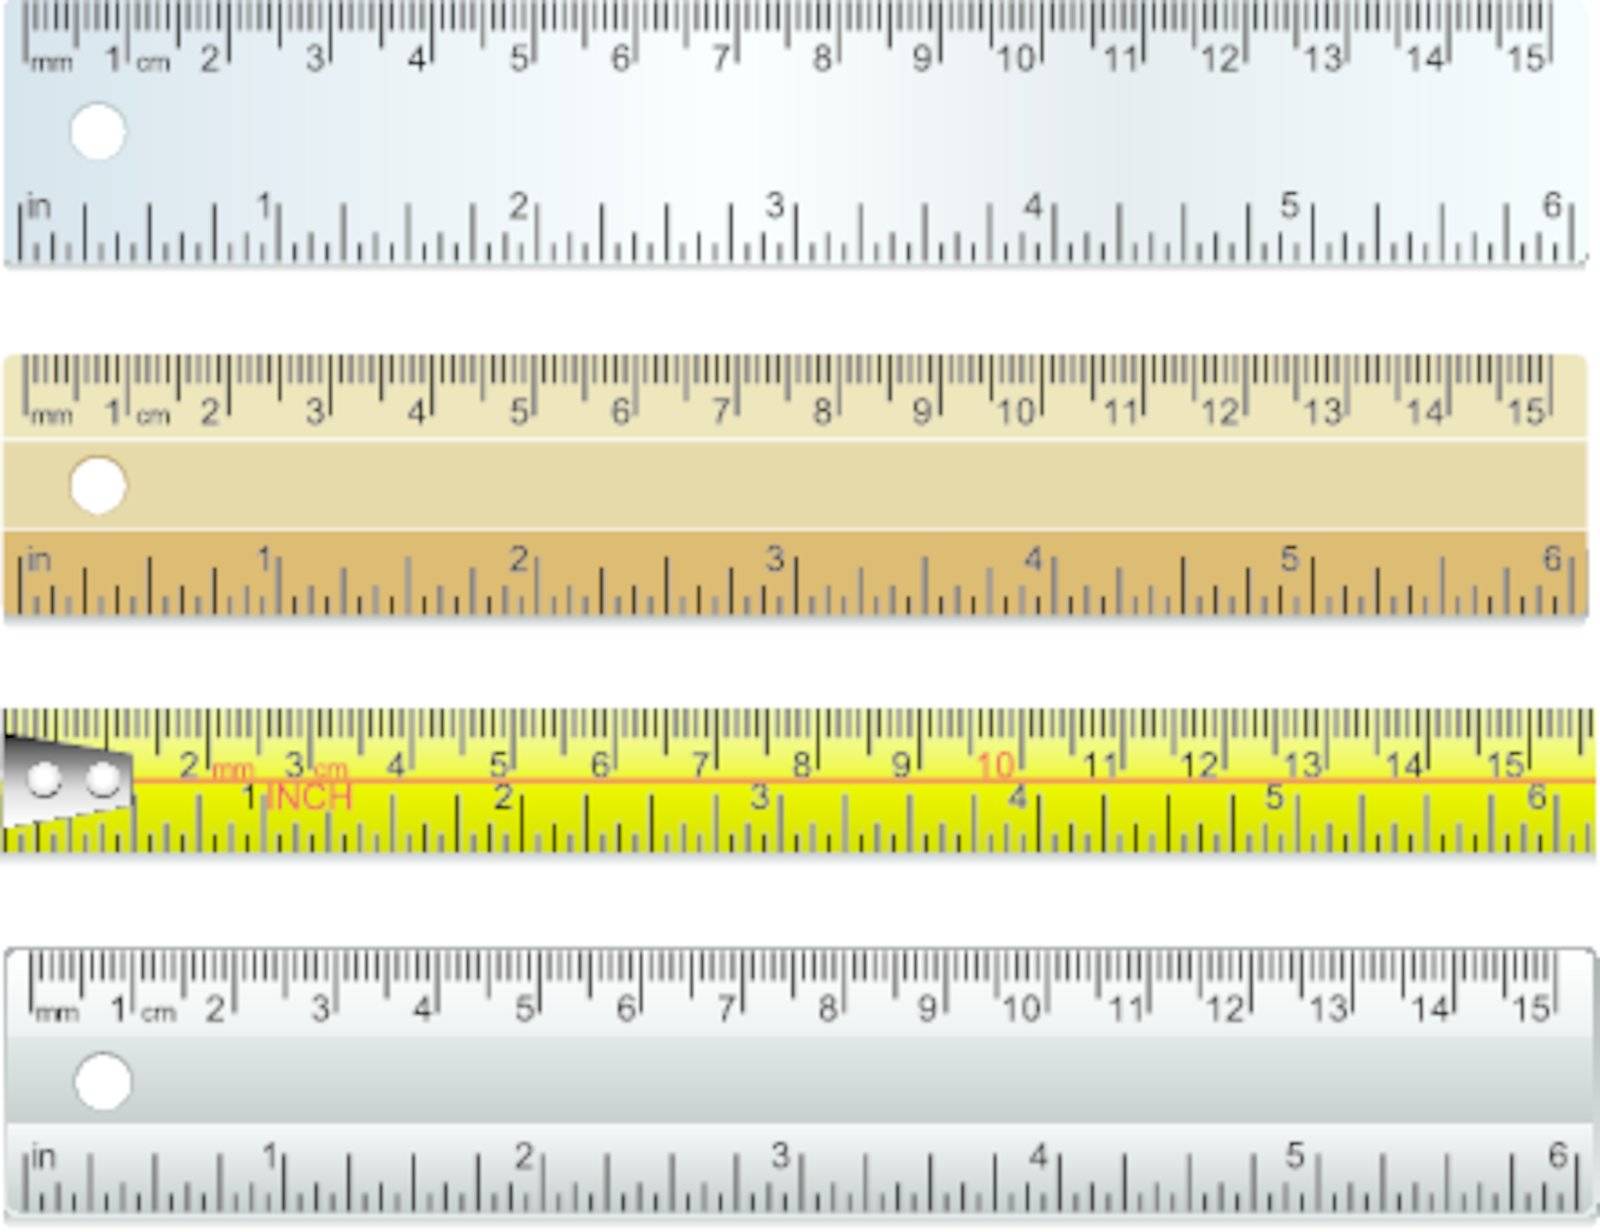 vector set of rulers and measuring tape in millimeters, centimetres and inches